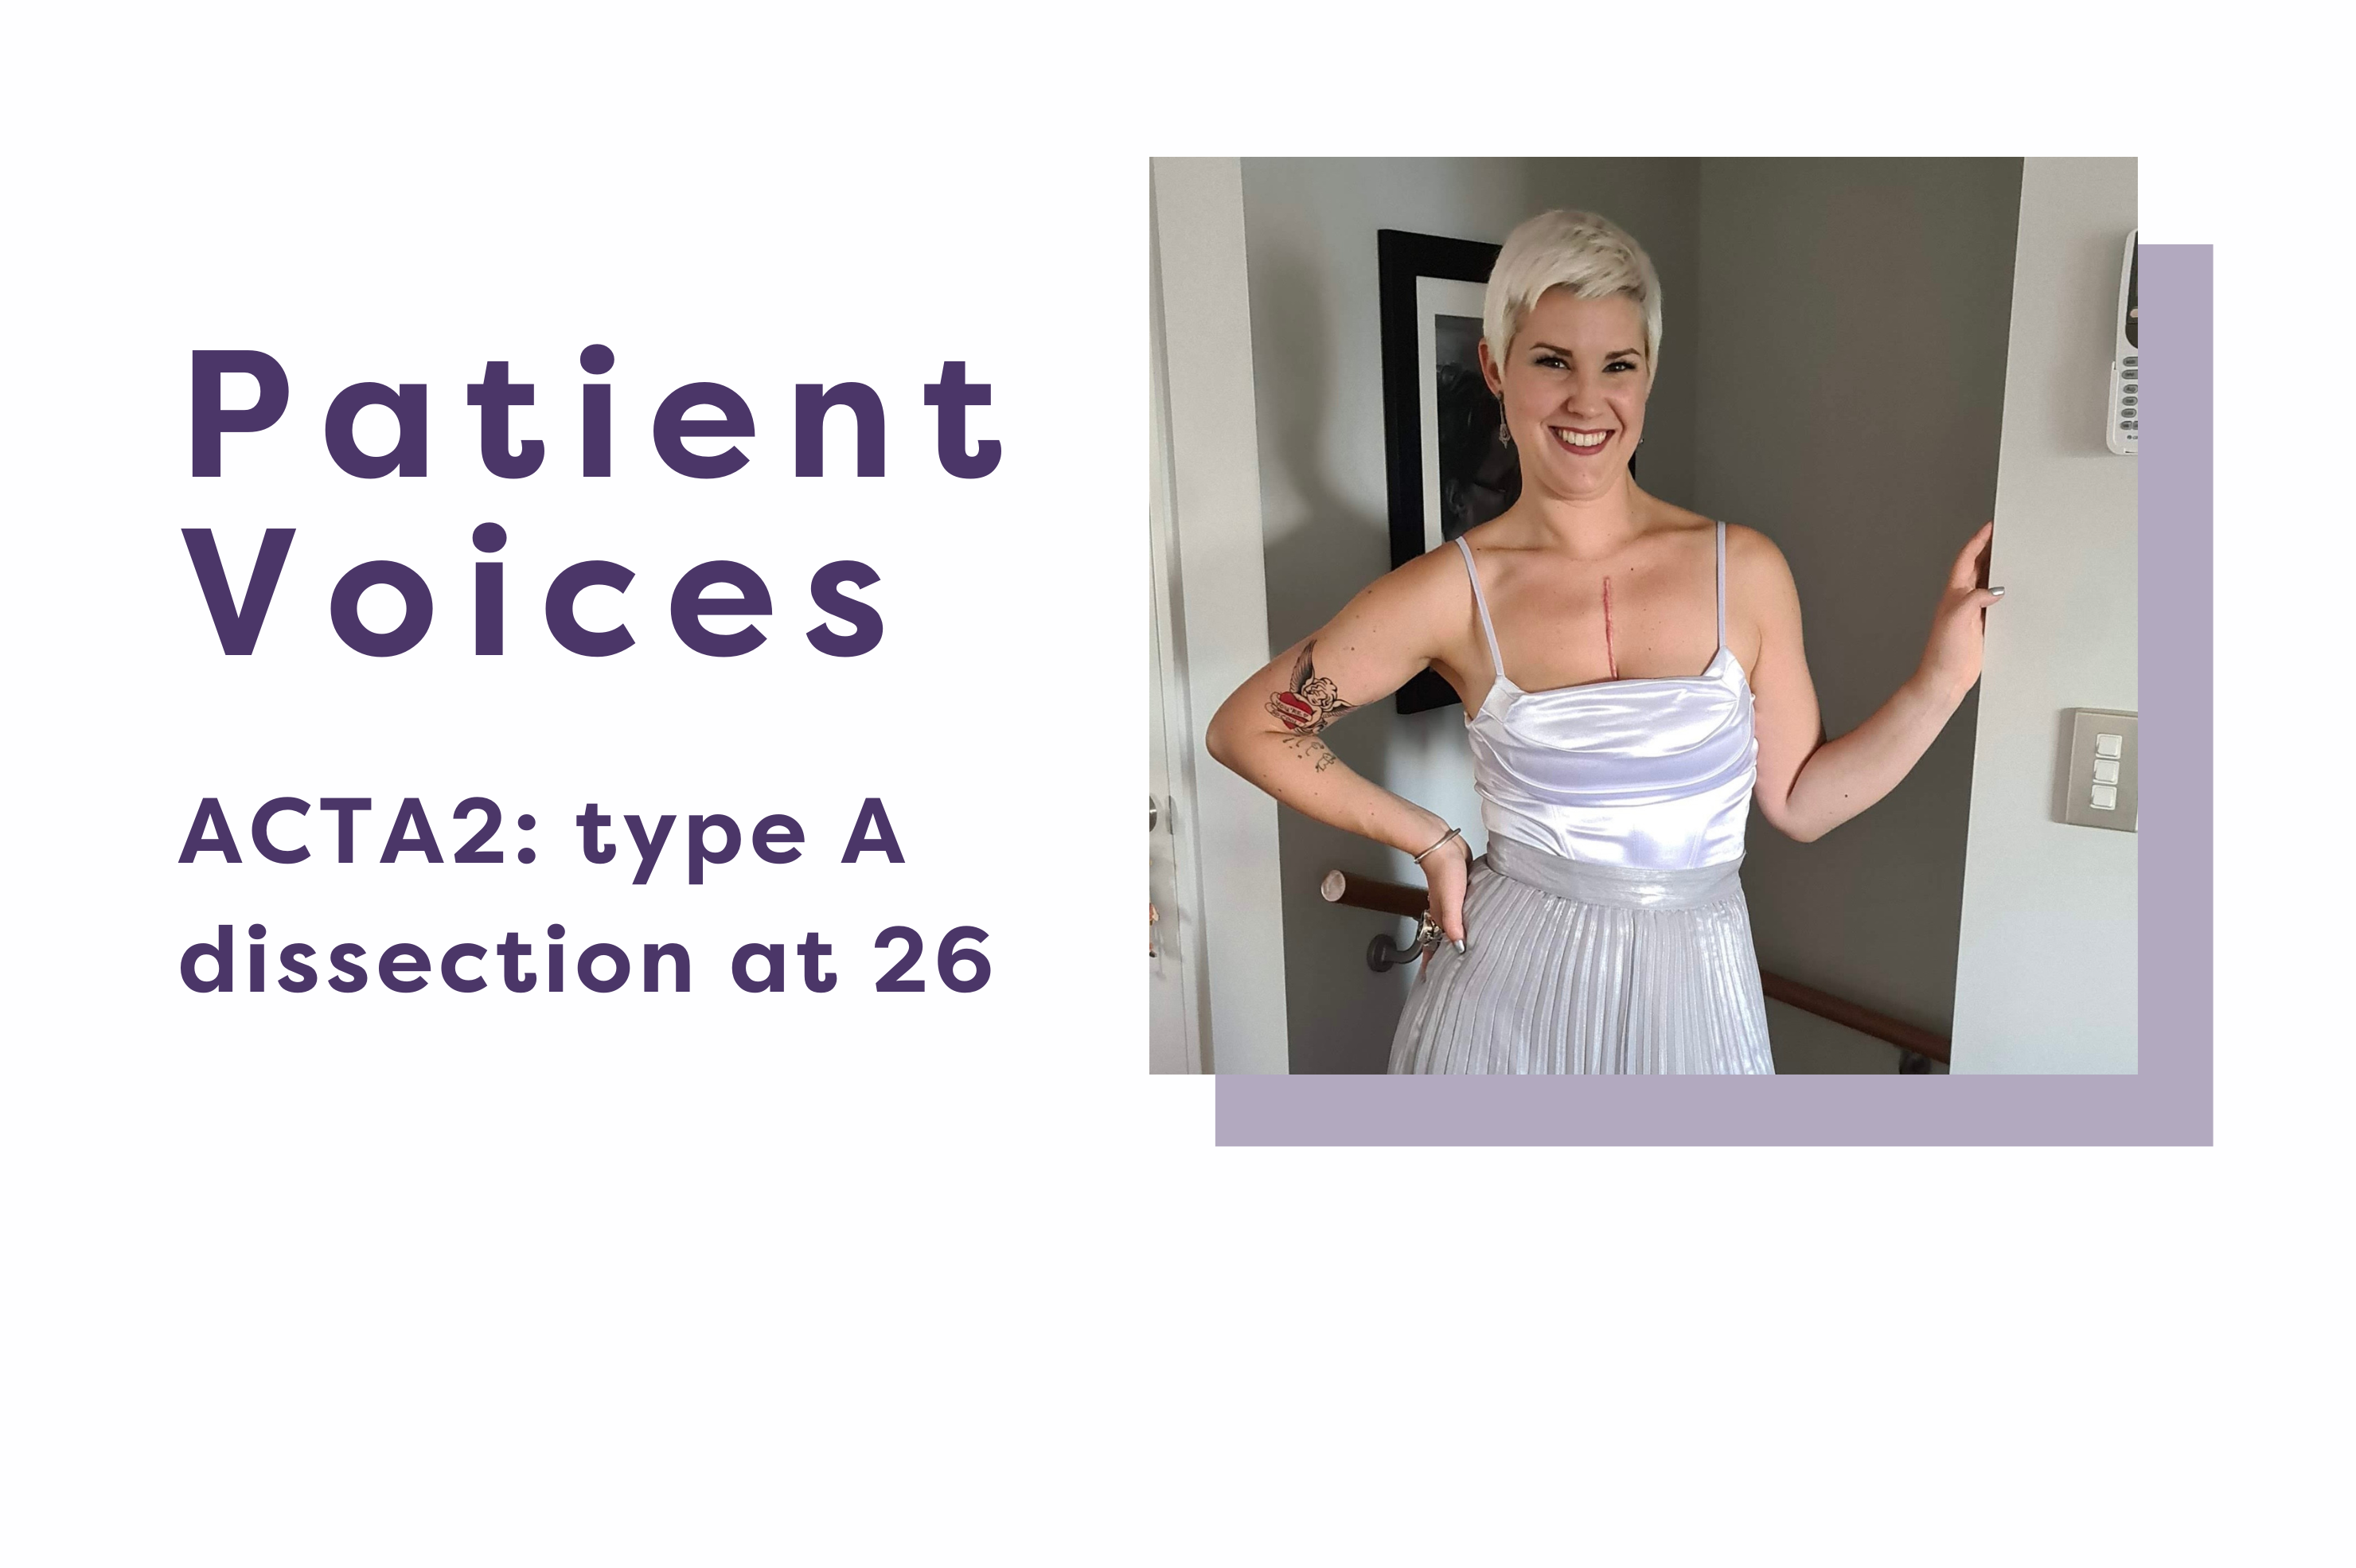 Patient Voices. ACTA2: type A dissection at 26. Picture of a blonde woman with short hair wearing a silver/white dress and smiling widely. She has a scar on her chest.